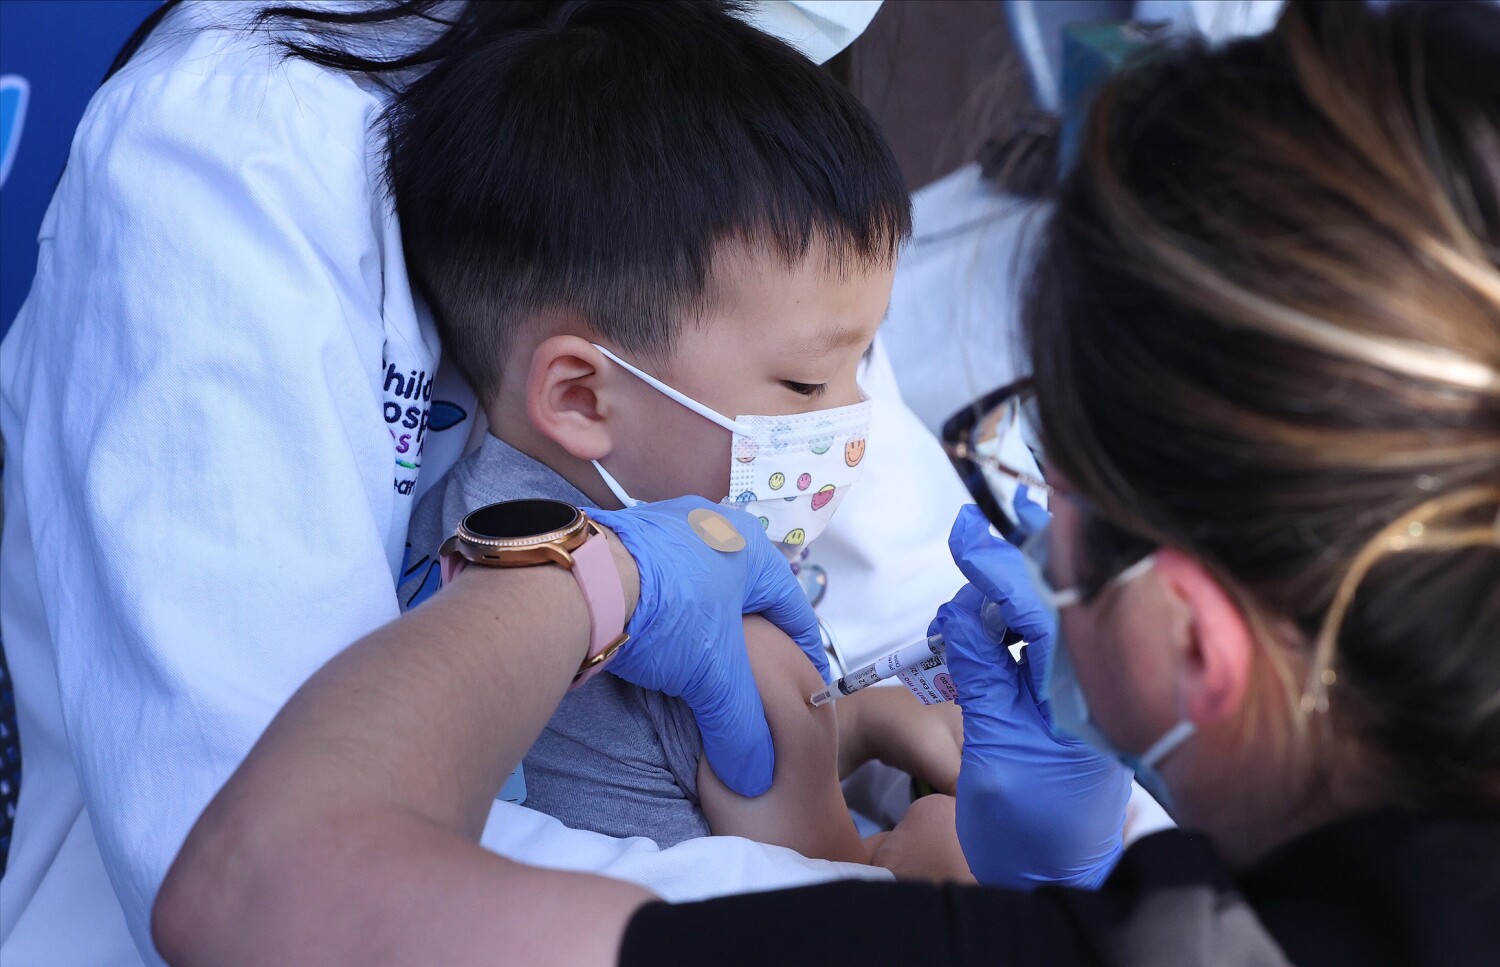 COVID vaccination of kids under 5 begins: Here's how to get shots in California